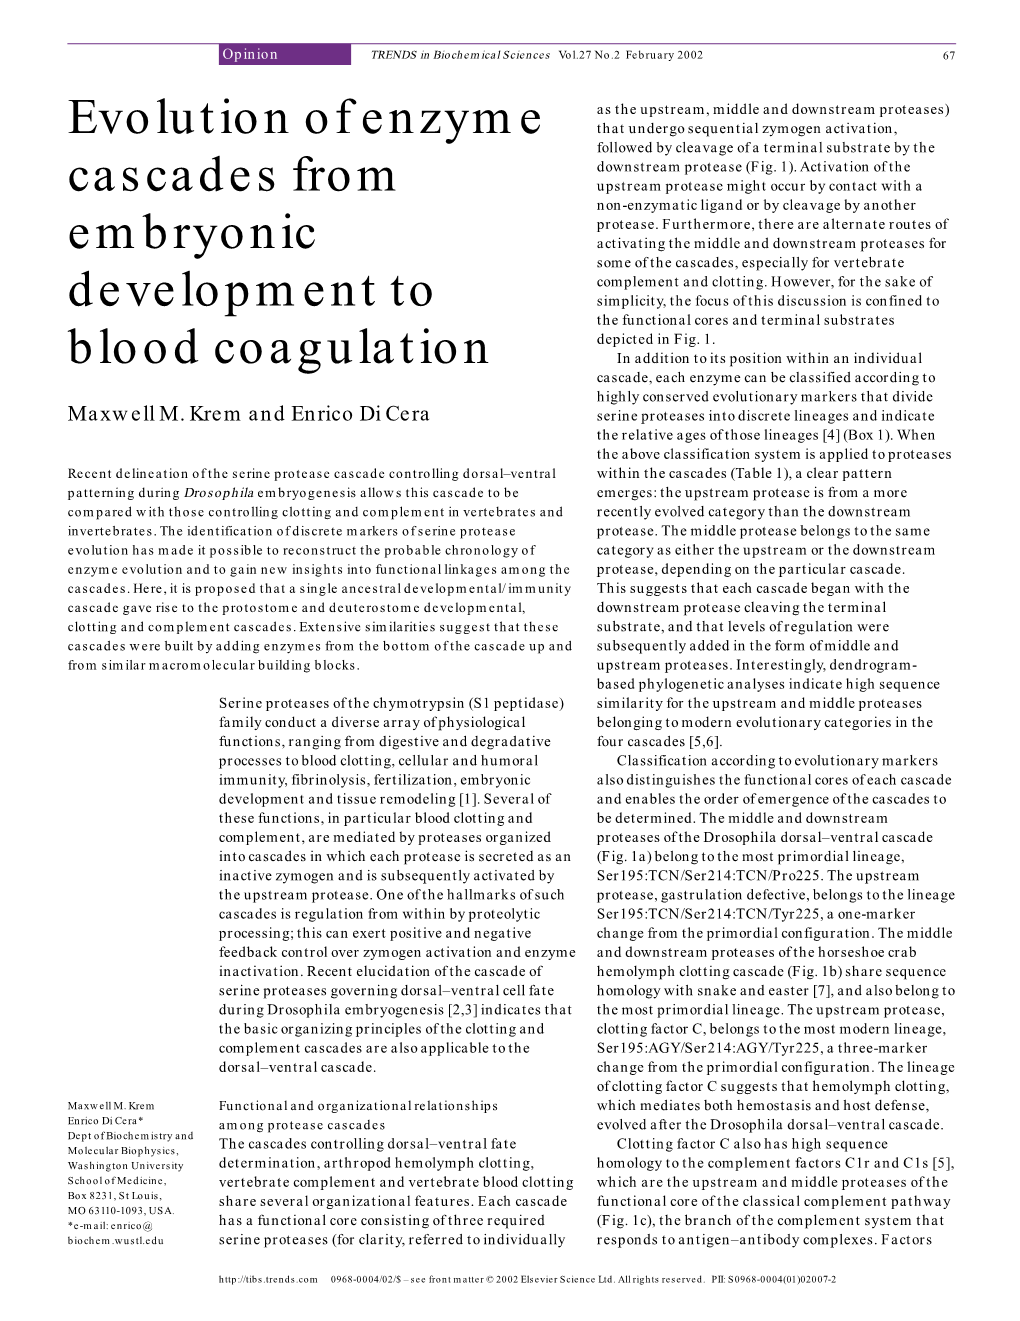 Evolution of Enzyme Cascades from Embryonic Development to Blood